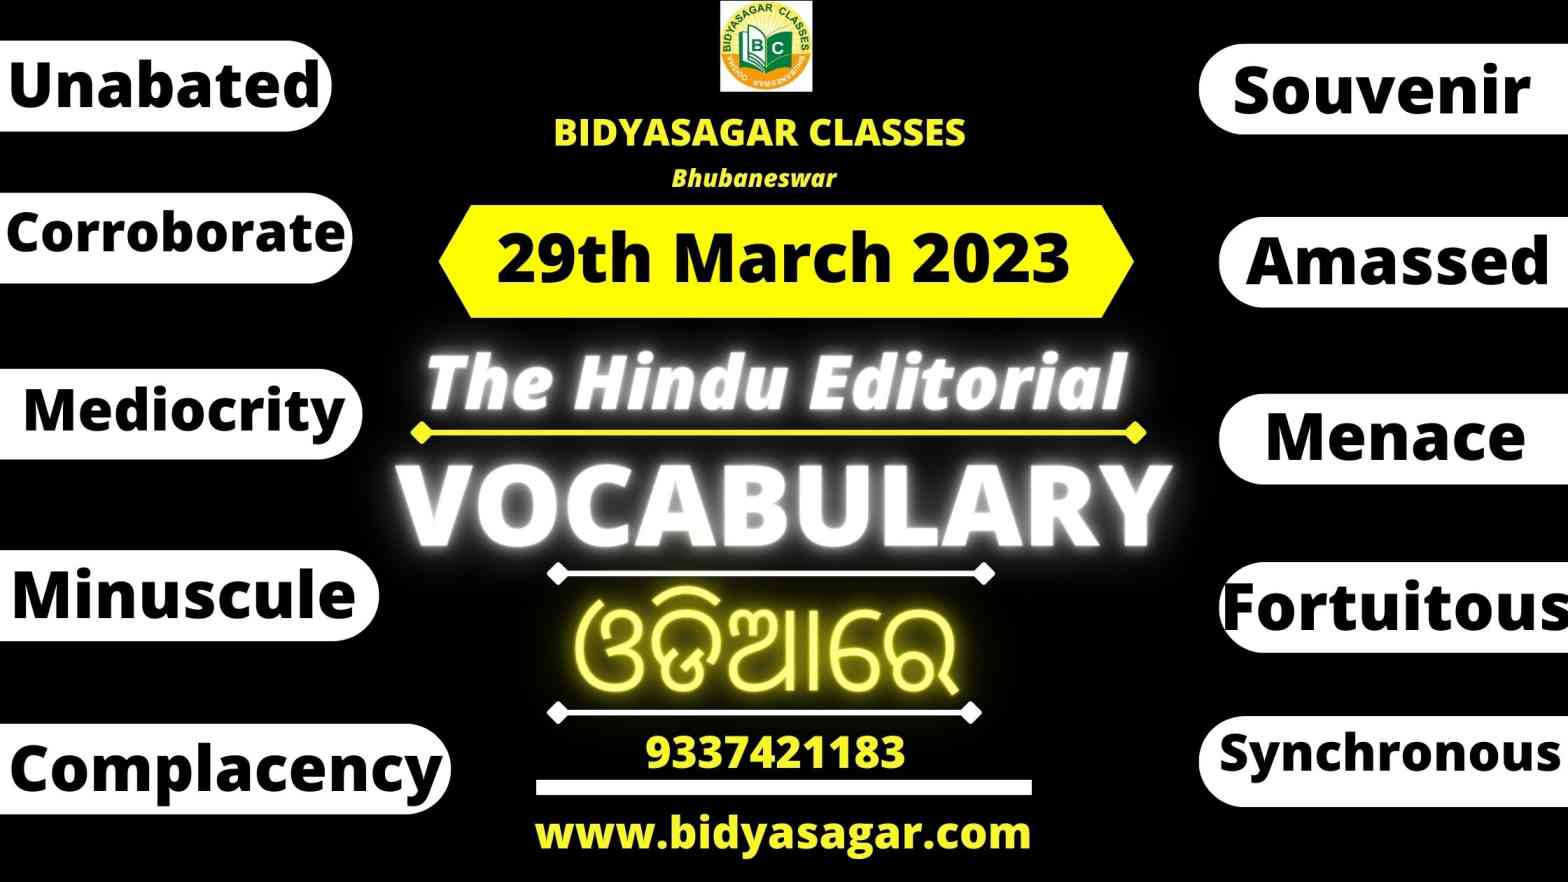 The Hindu Editorial Vocabulary of 29th March 2023